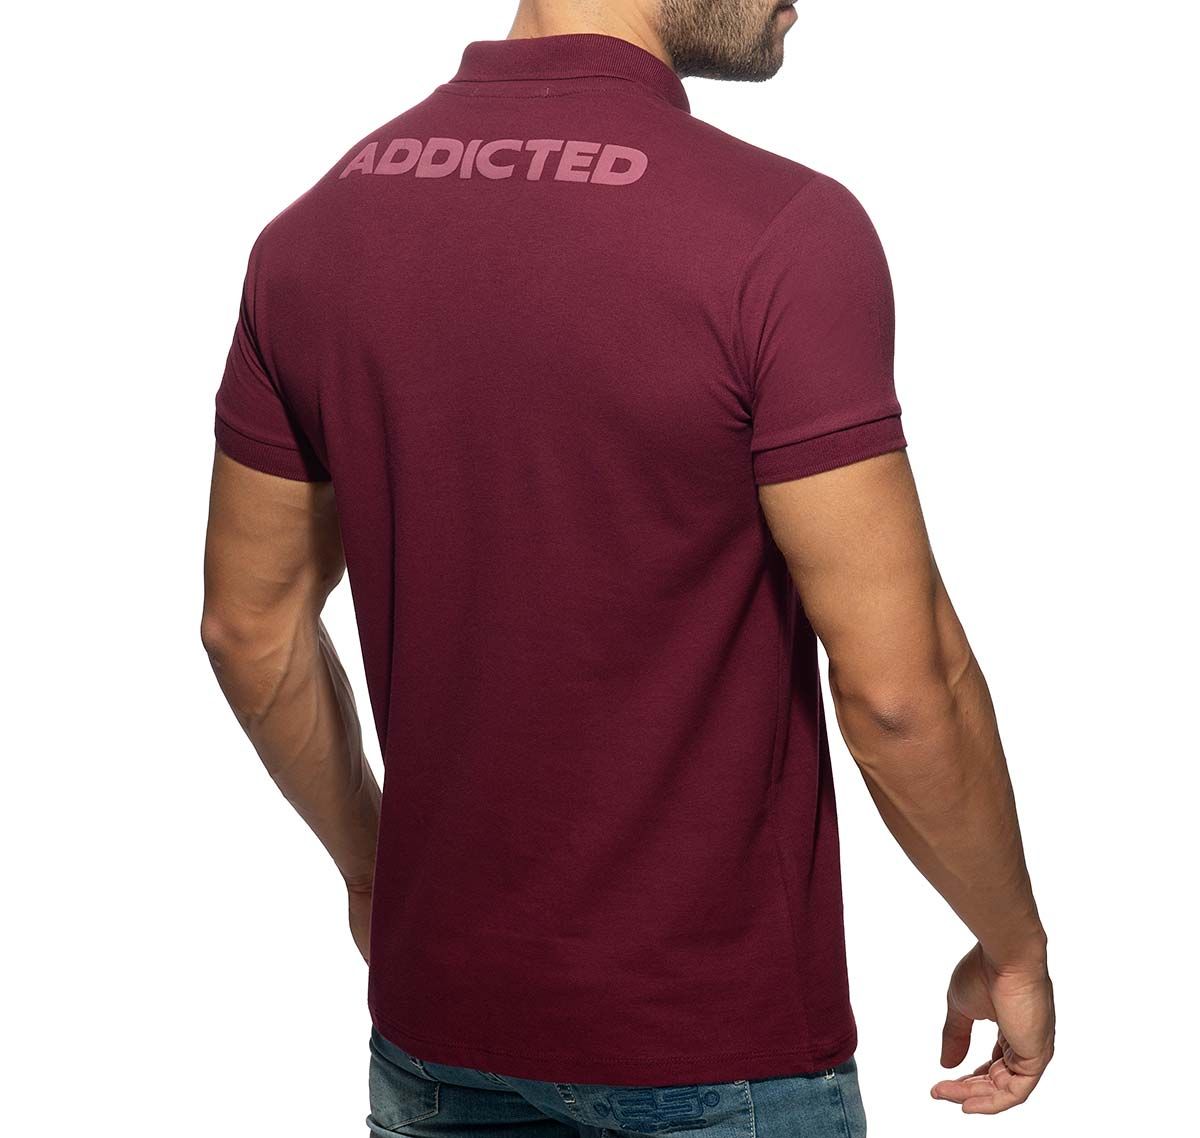 Addicted Polo Shirt AD CLASSIC POLO SHIRT AD949, wine red